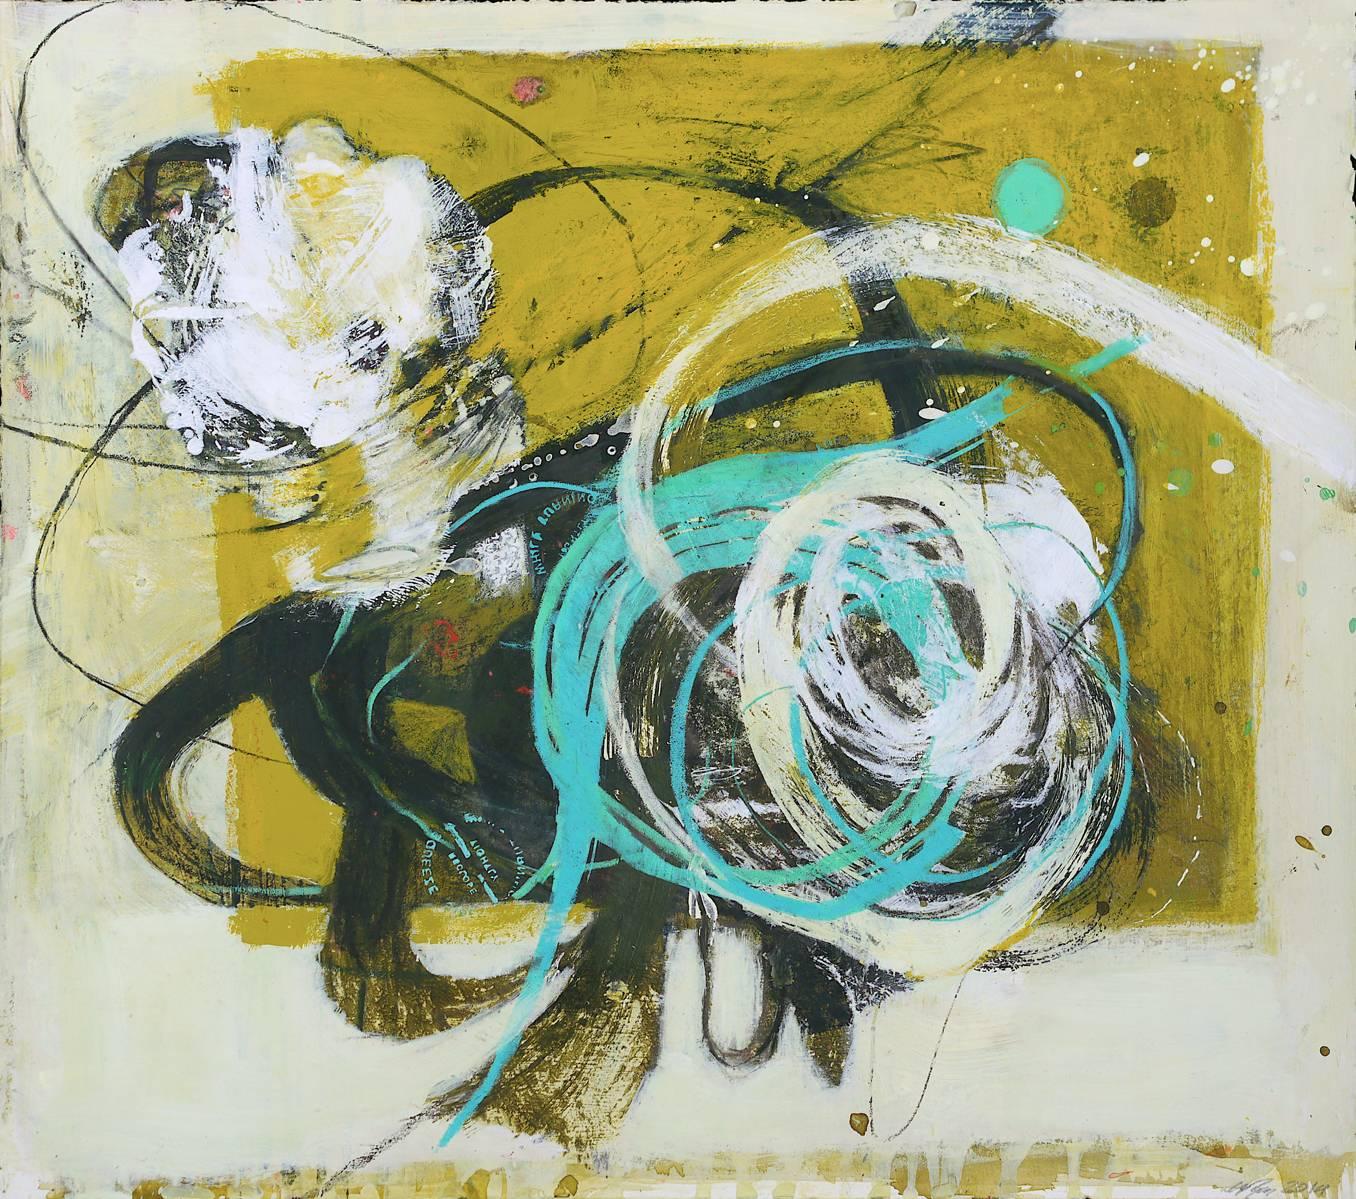 "Beetles Prosody" is by Melissa Zarem, an abstract painter who combines expressive gestures, layered textures and formal graphic elements. It features black, white and turquoise against off-yellow. Zarem currently lives and works in Ithaca, New